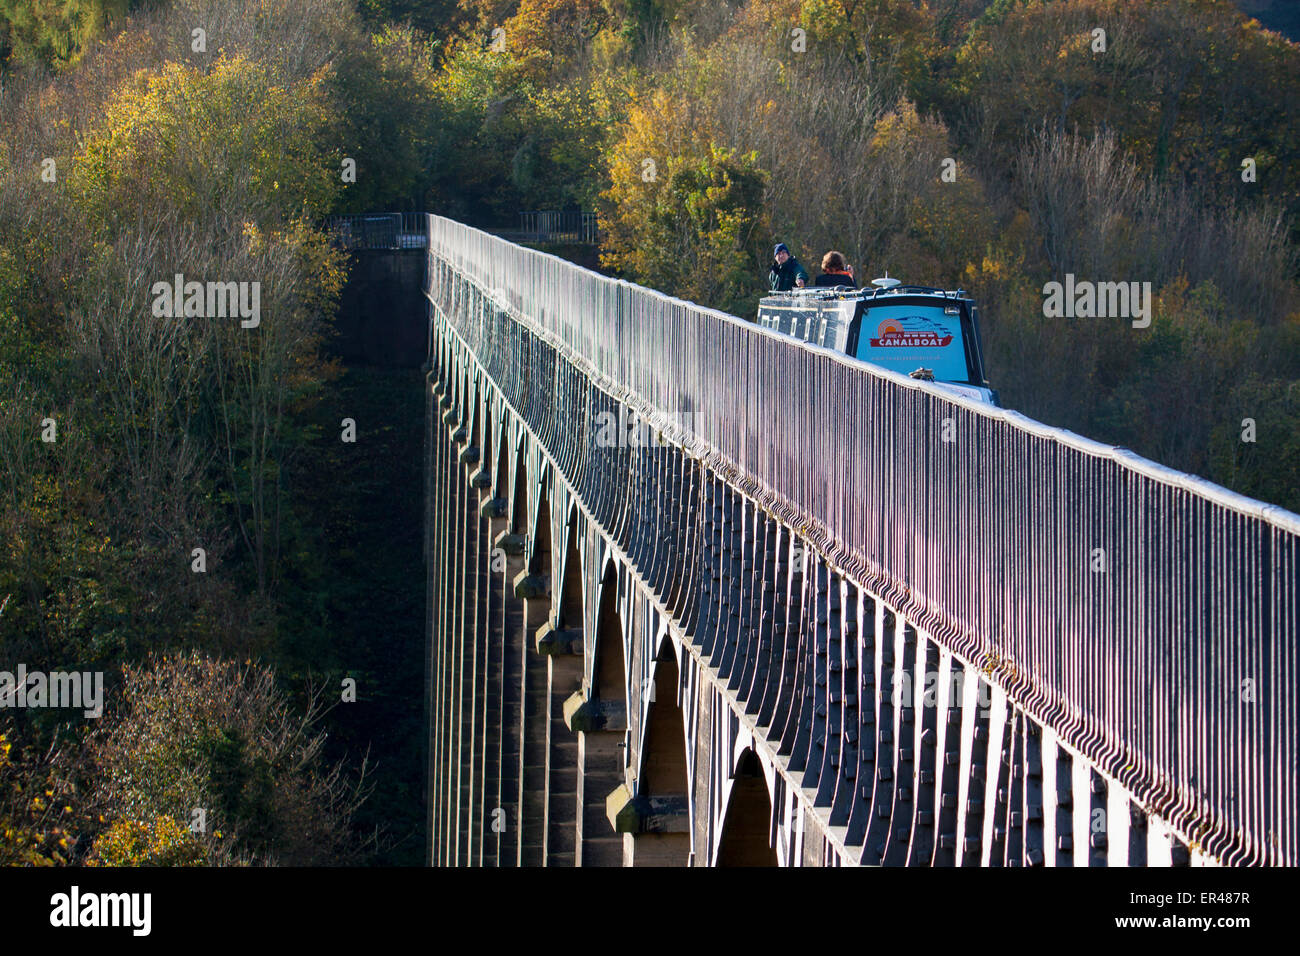 Pontcysyllte Aqueduct in autumn with canal boat crossing with couple Trevor Near Llangollen Wrexham County North East Wales UK Stock Photo